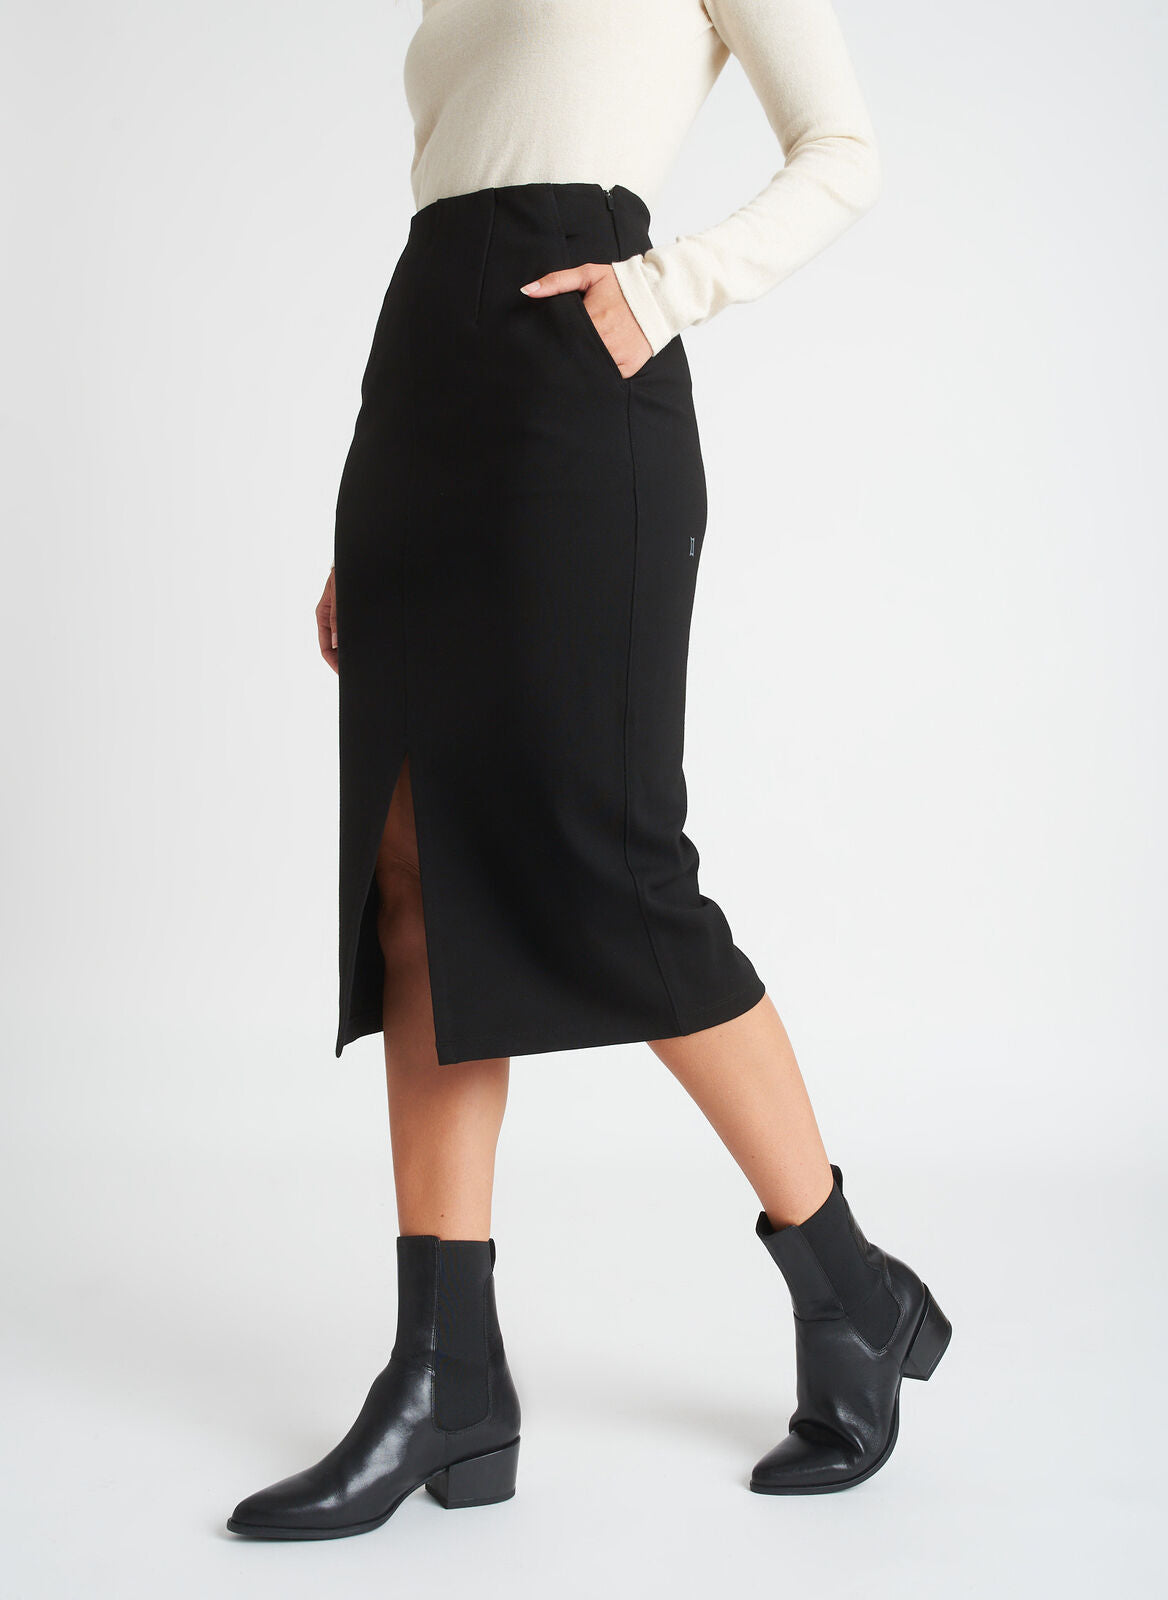 Serenity Pencil Skirt | Women's Shorts and Skirts – Kit and Ace